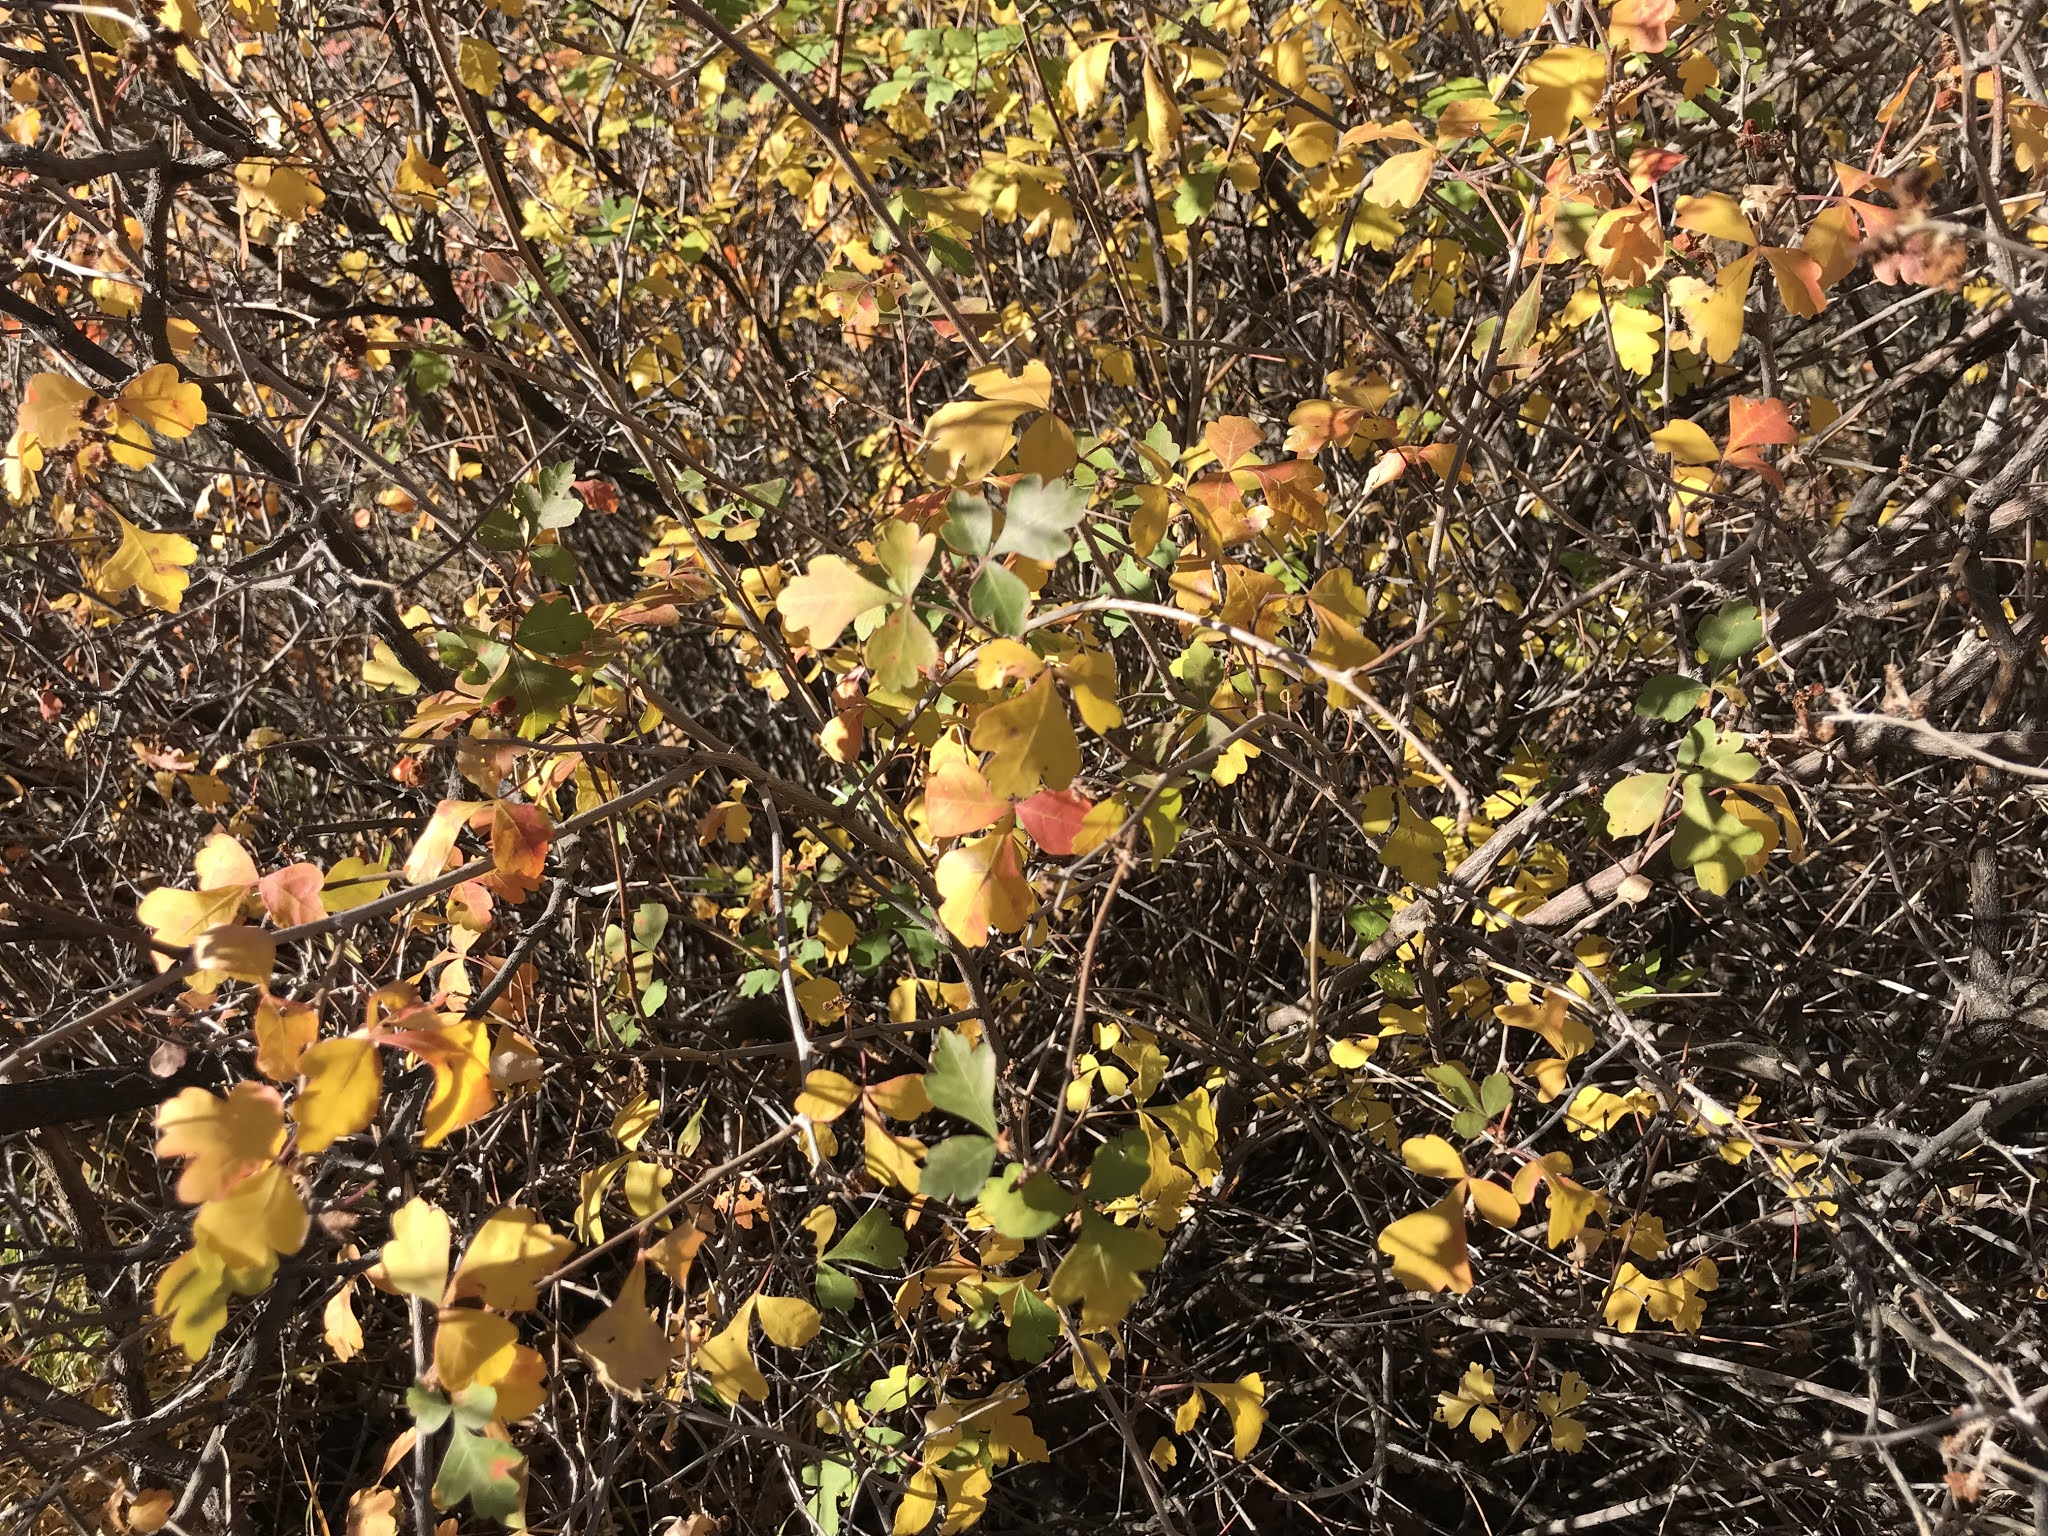 Co Horts Native Shrubs For Fall Color